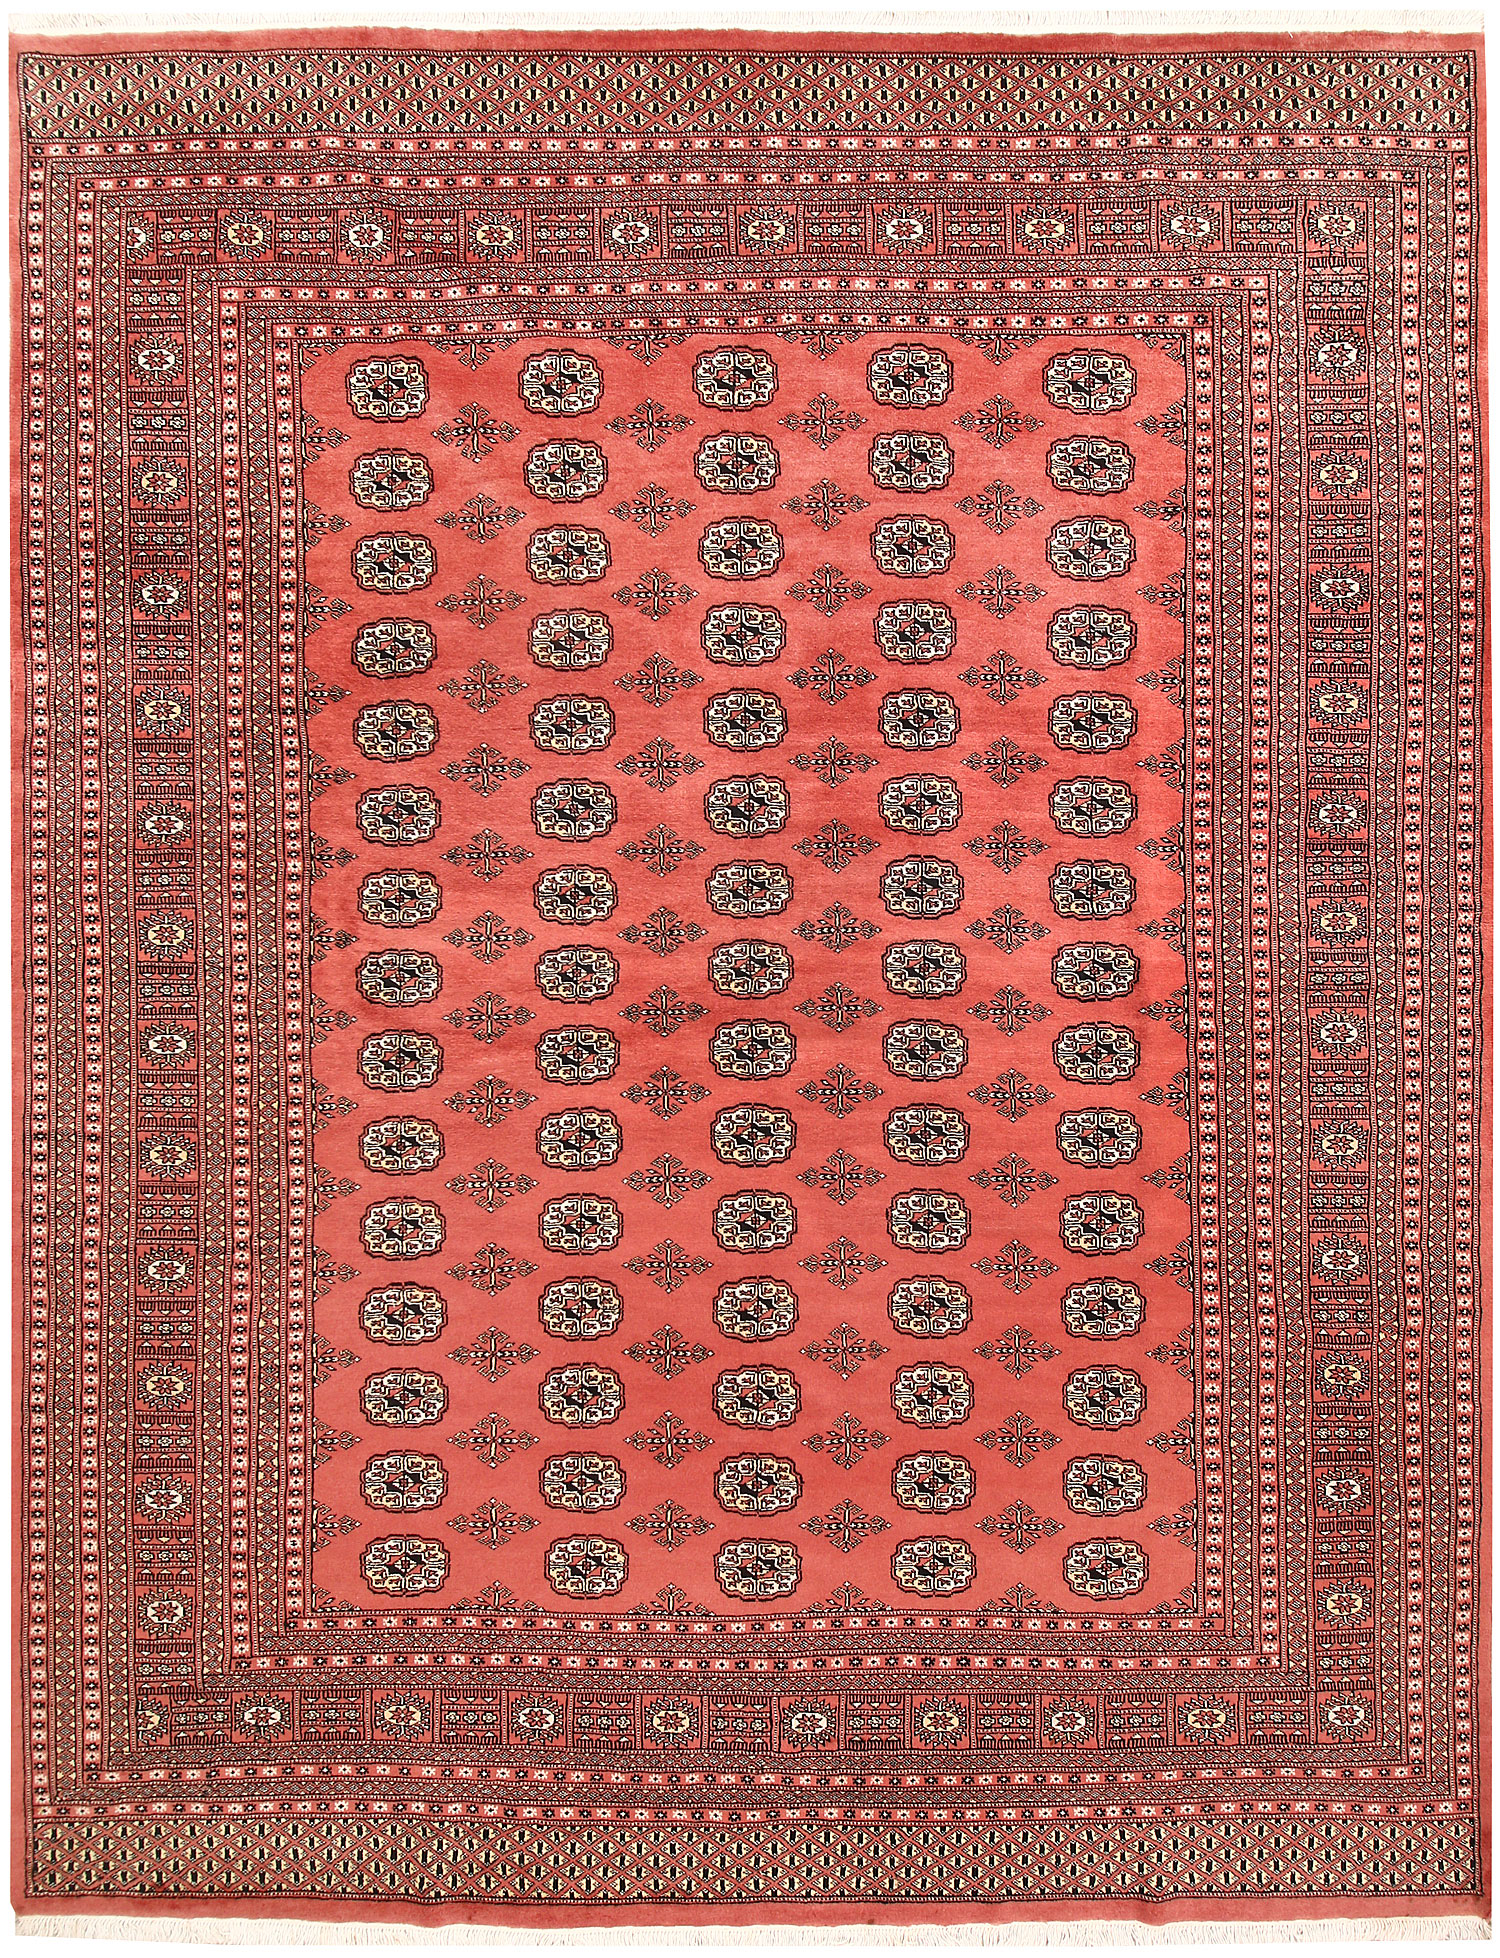 Caucasian Rugs For Sale